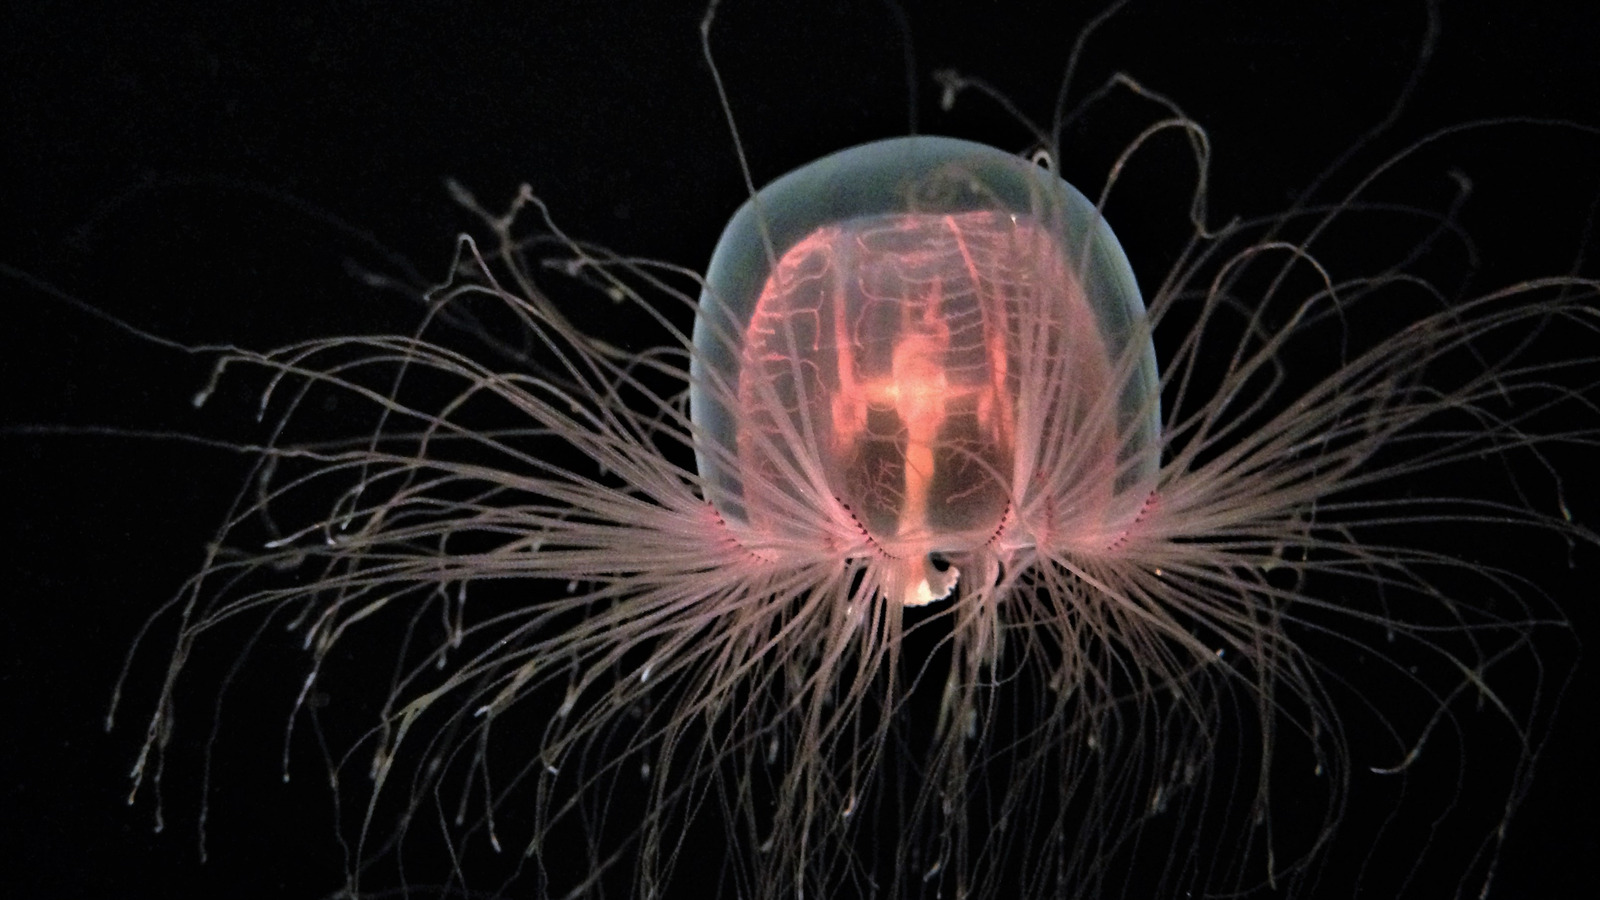 Jellyfish Airplant wow I have never seen anything like this